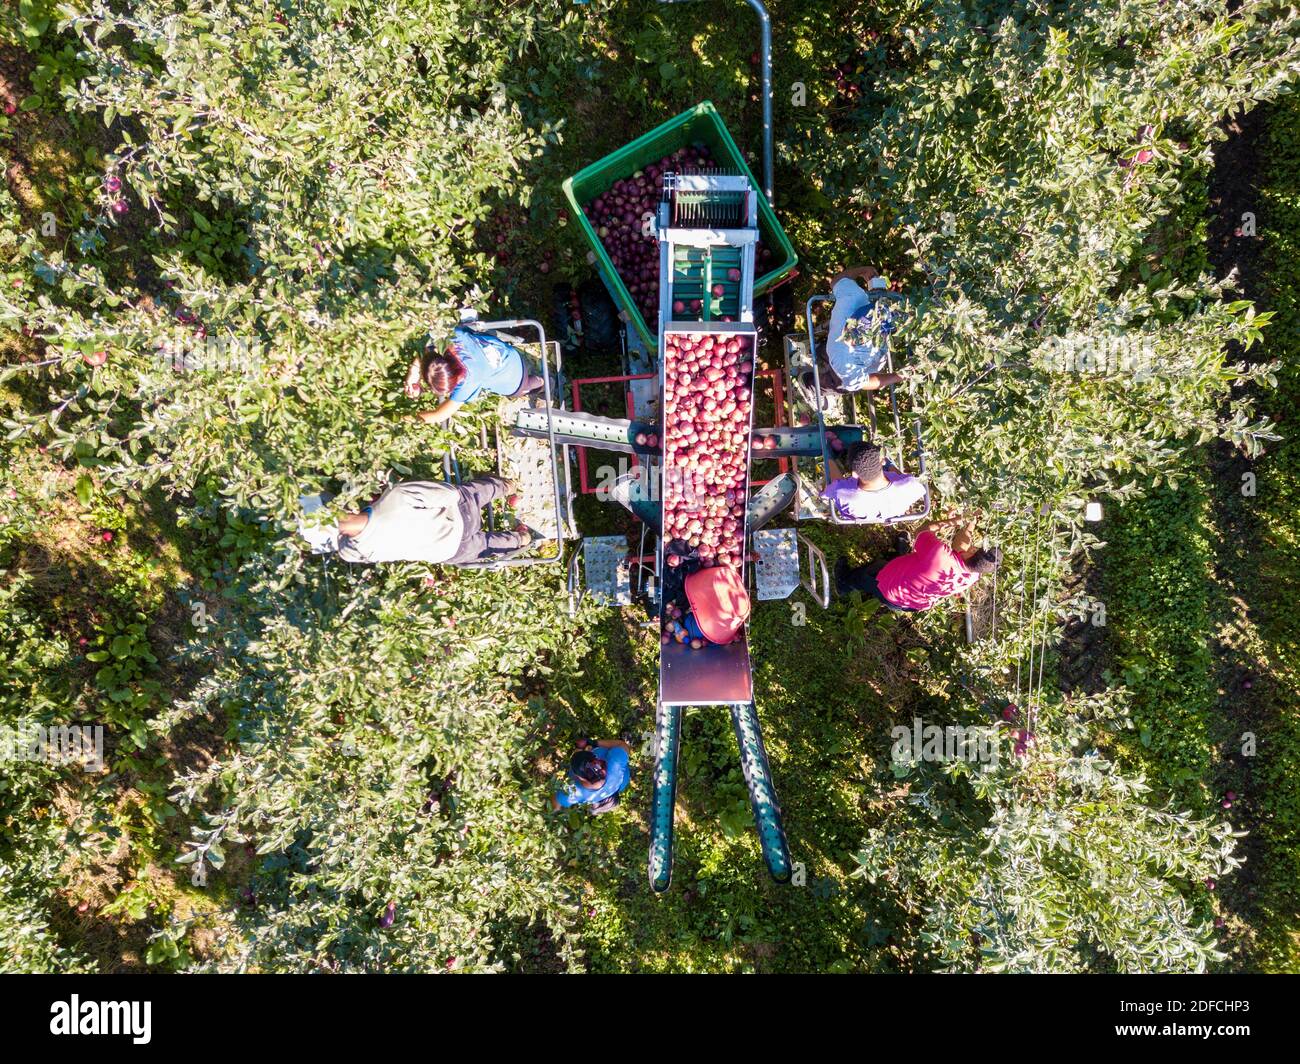 Workers picking apples during harvest using automatic machine seen from above, Valtellina, Sondrio province, Lombardy, Italy Stock Photo